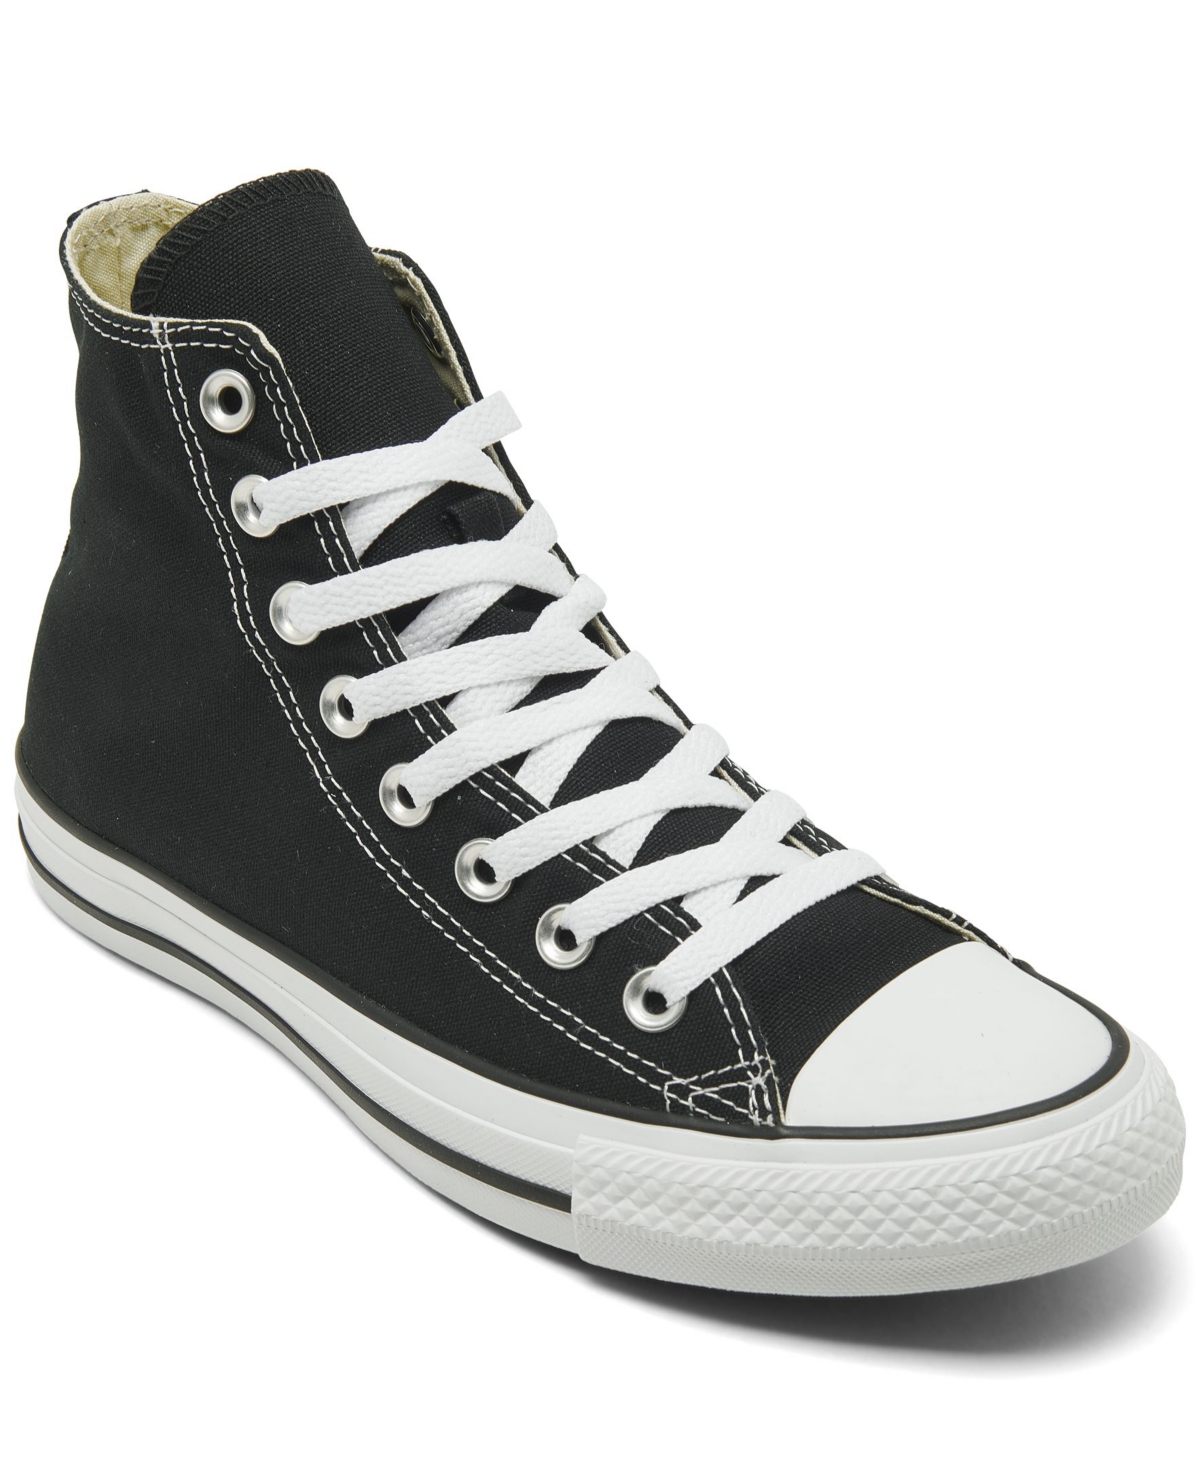 Women's Chuck Taylor High Top Sneakers from Finish Line - Black